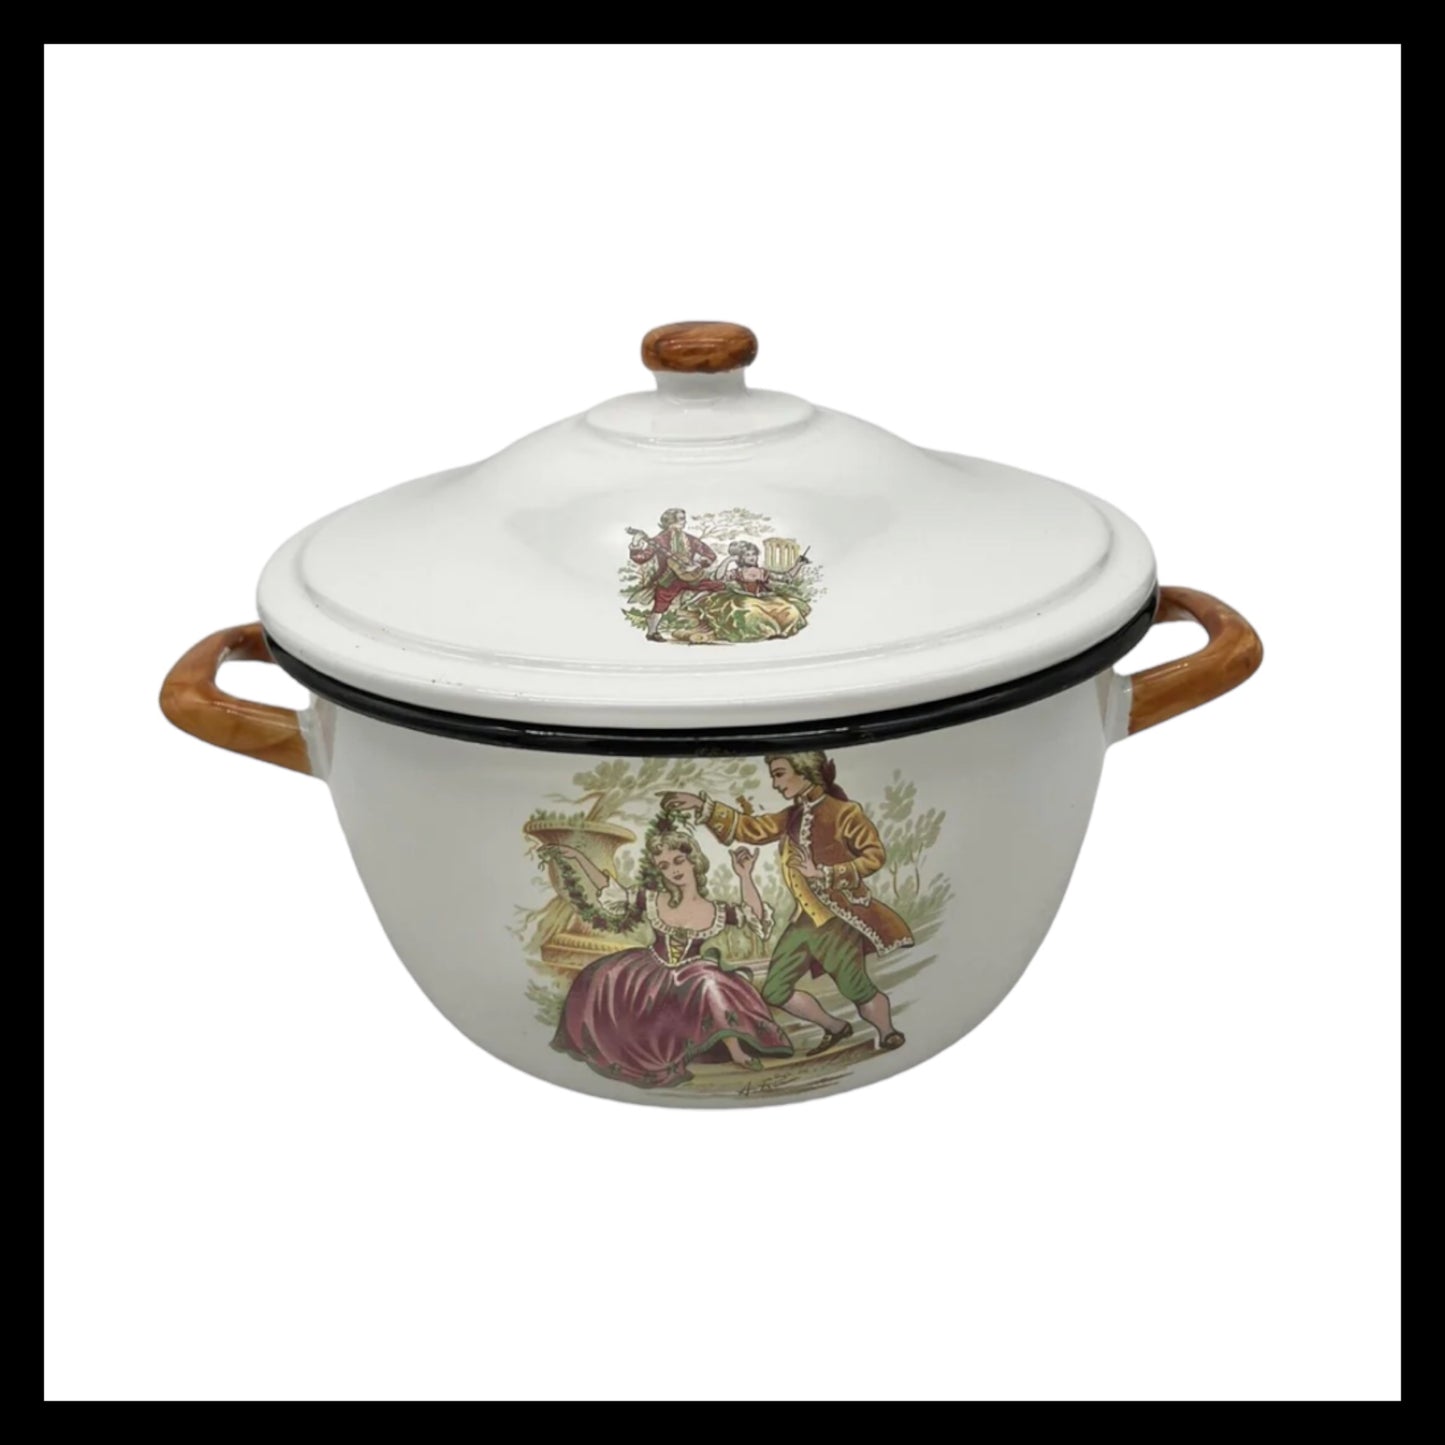 image French enamel farmhouse kitchen casserole dish stockpot sold by All Things French Store